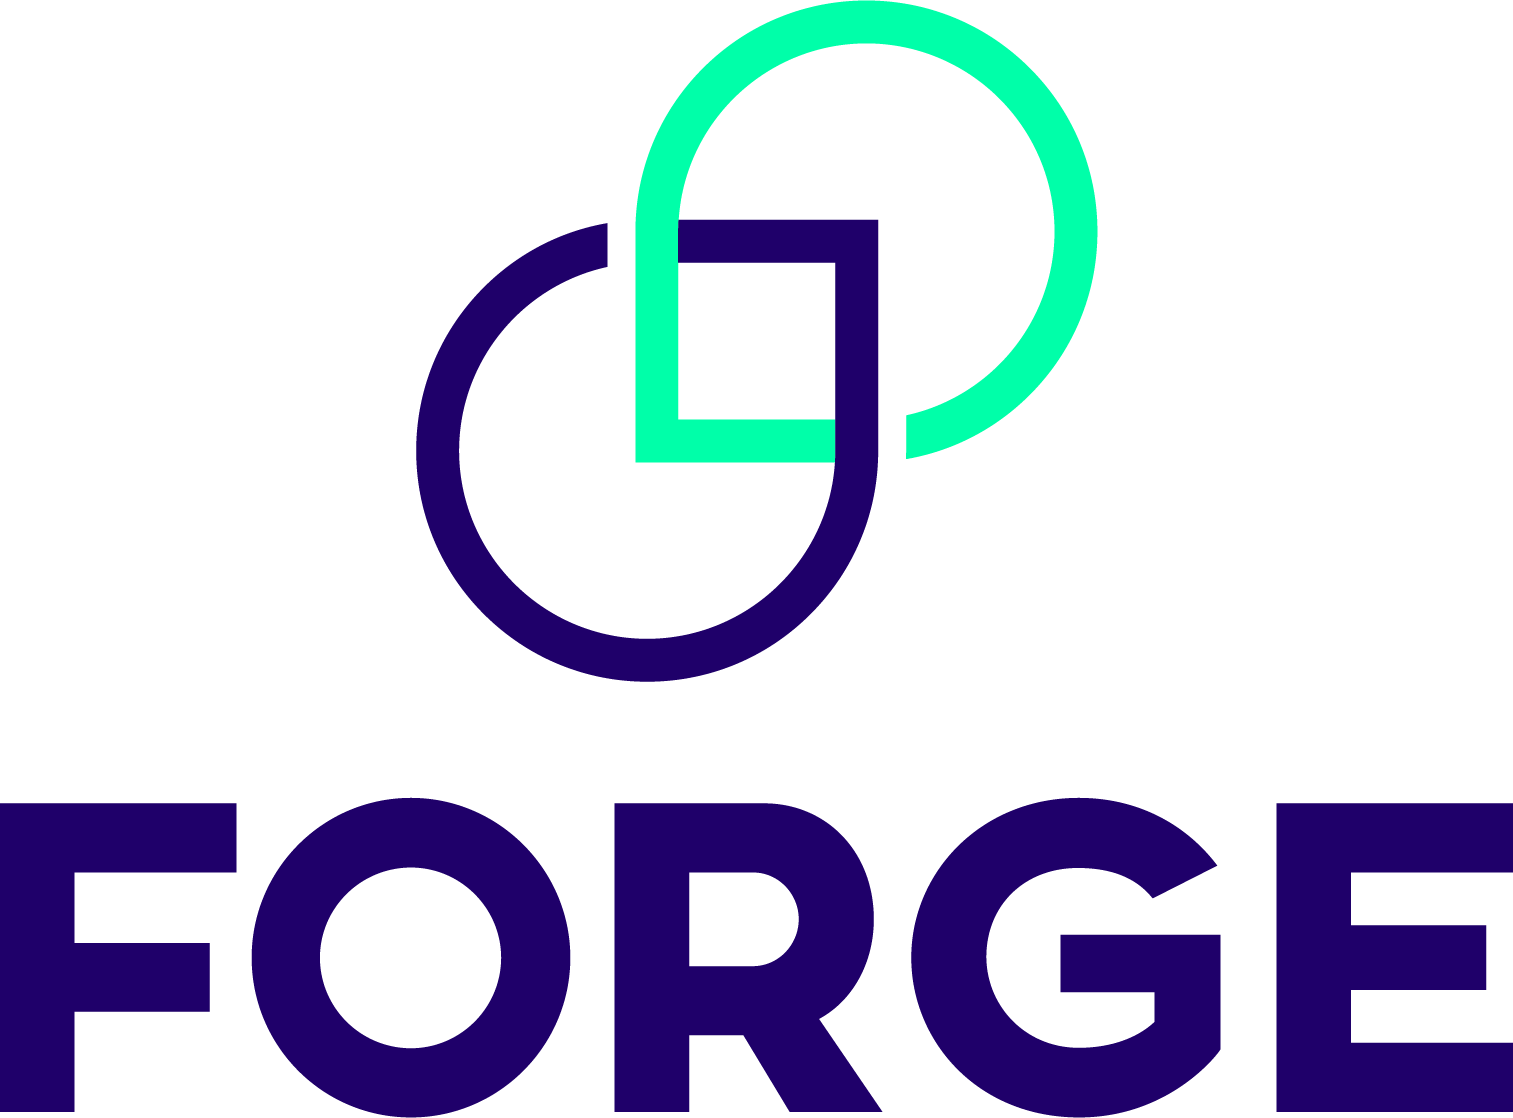 FORGE logo (5).png